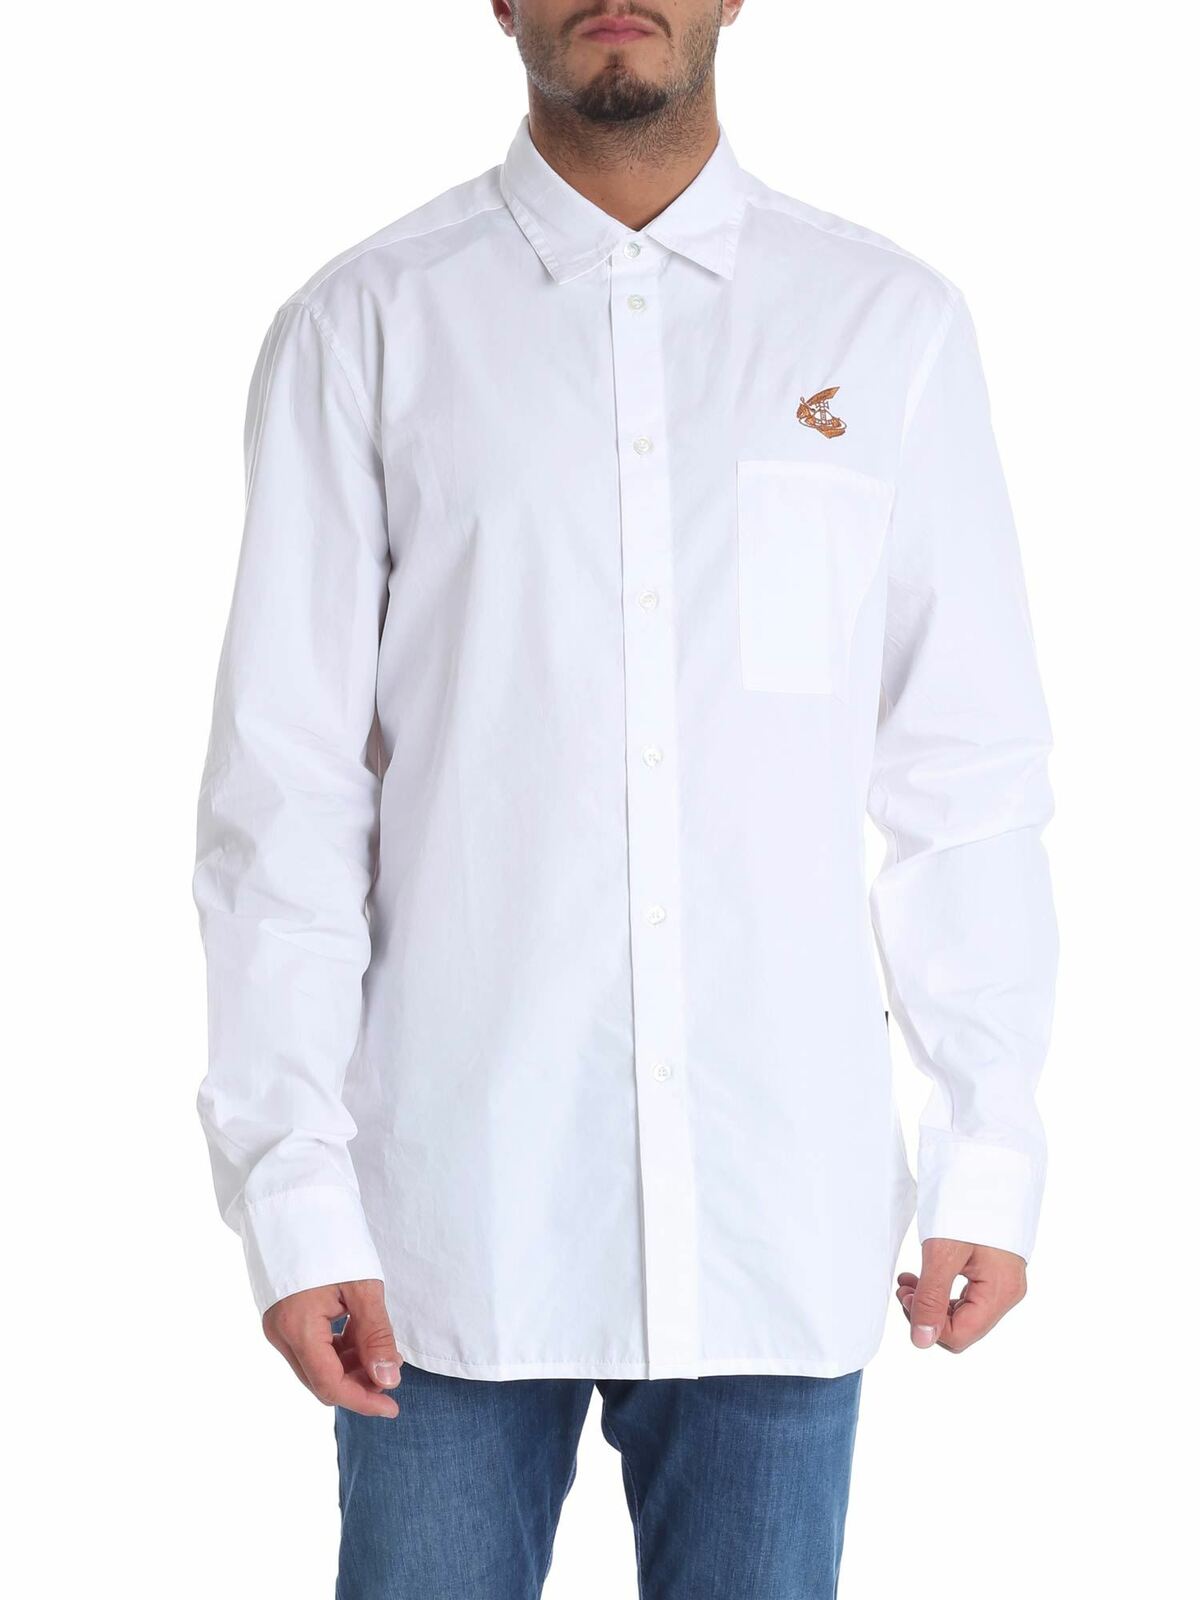 Vivienne Westwood Anglomania White Shirt With Patch Pocket